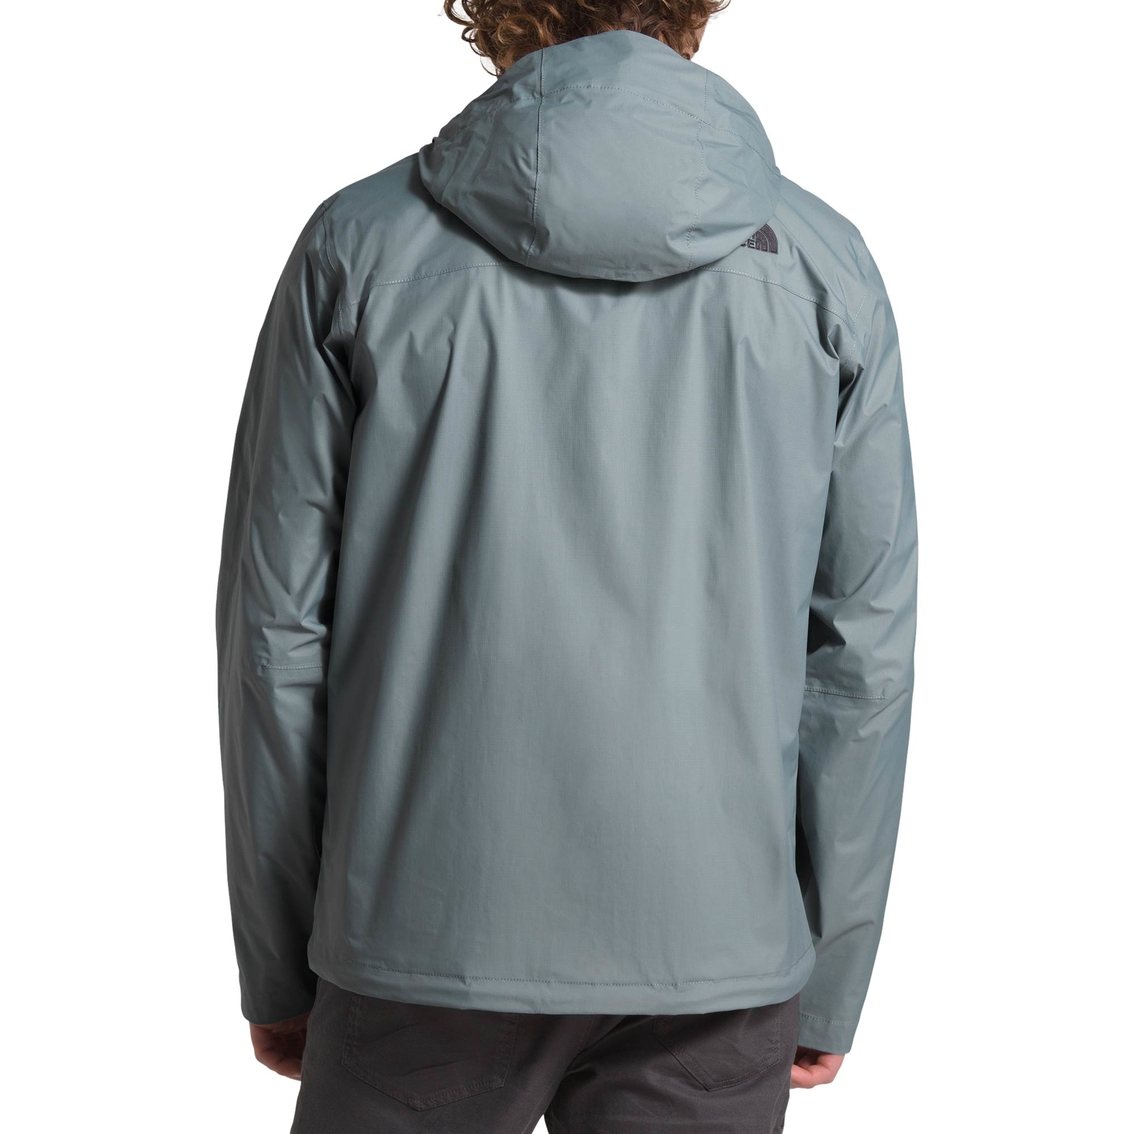 The North Face Venture 2 Jacket - Image 3 of 3